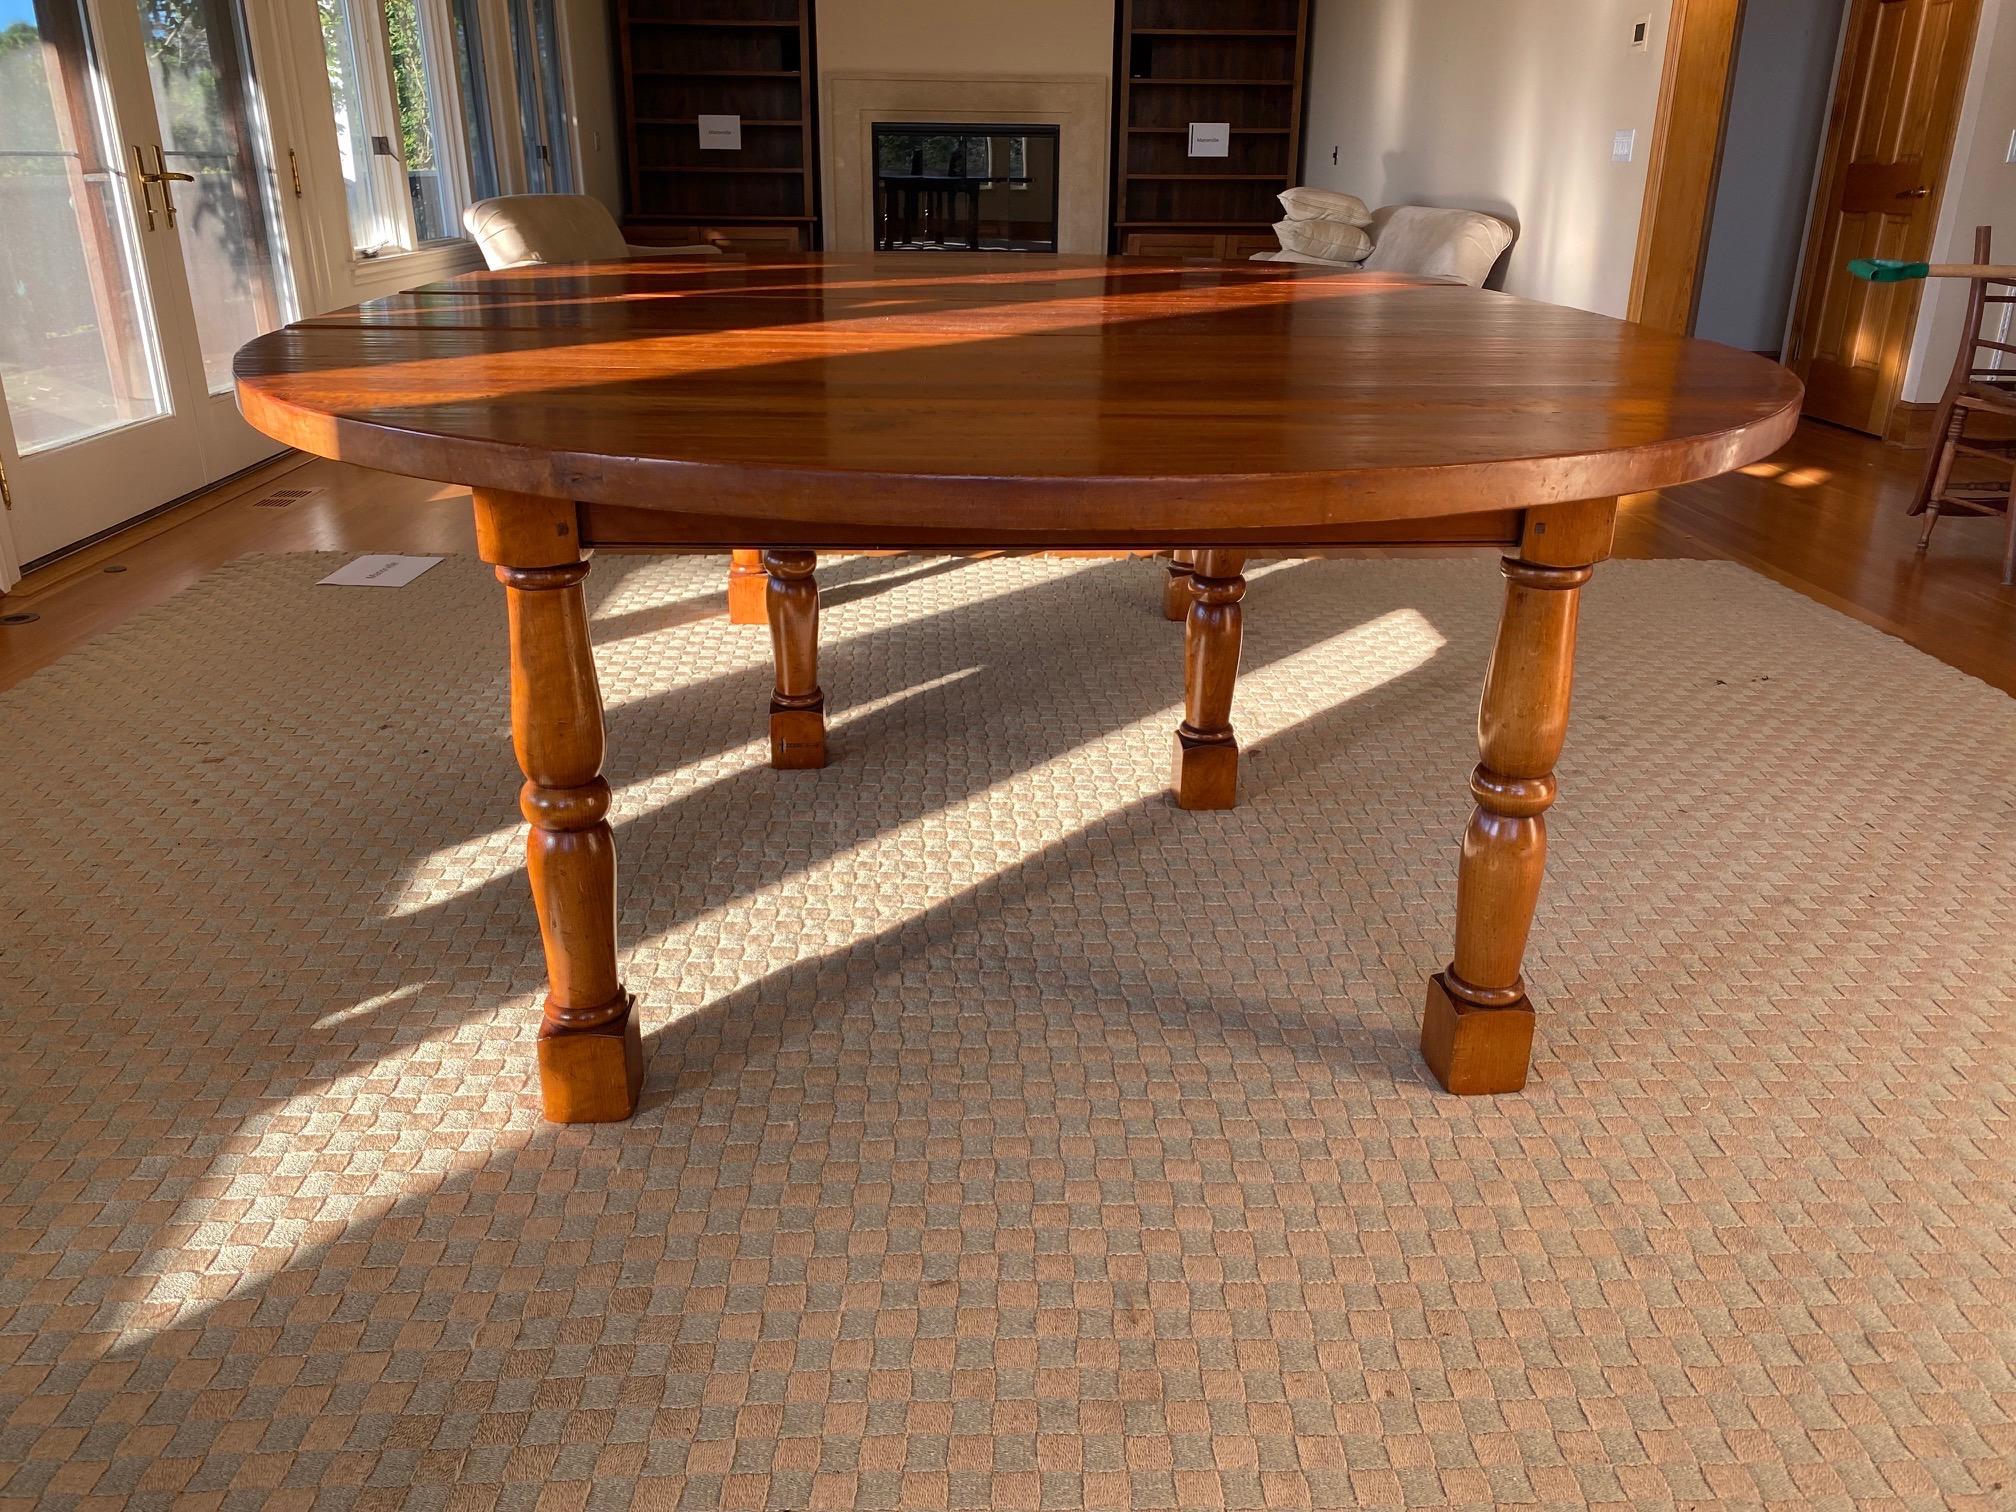 Custom-made Large Pine Round to oval dining table, Handmade in England
Six turned baluster legs ending on square blocks. 
72” round (not perfect round)
2 x 18” leaves
Measures: 108